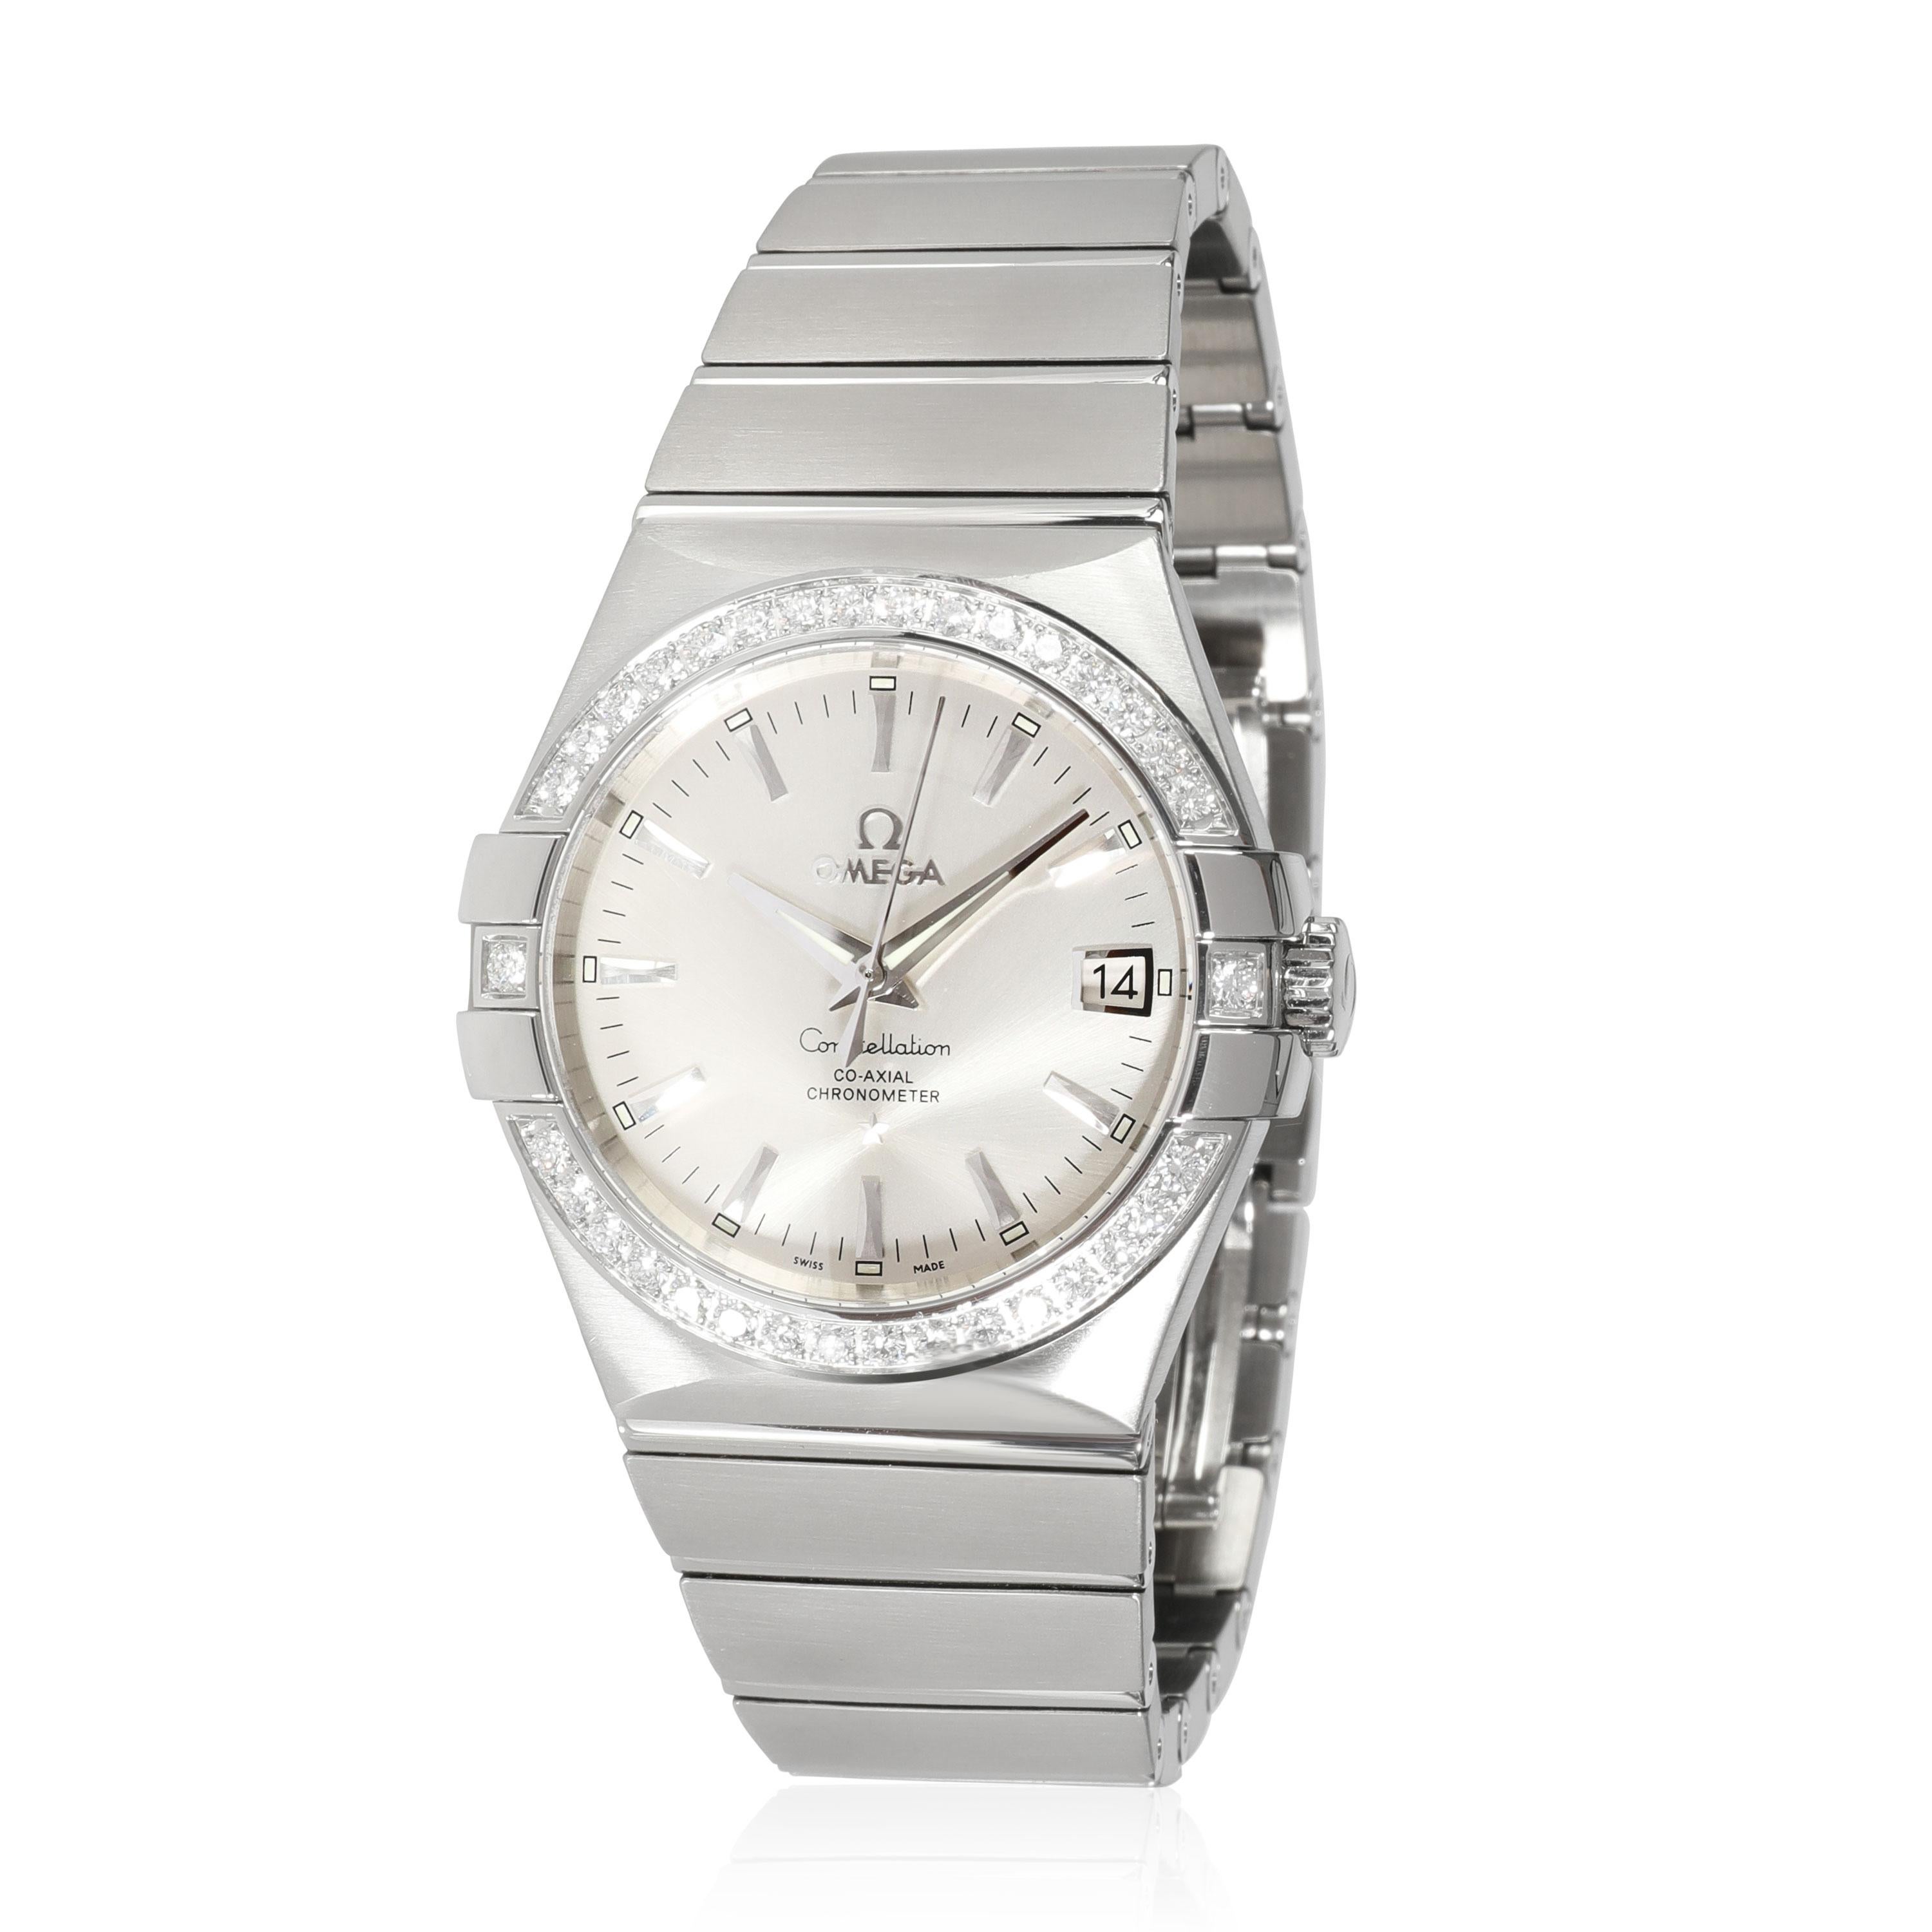 Omega Constellation 123.15.35.20.02.001 Men's Watch in Stainless Steel

SKU: 110807

PRIMARY DETAILS
Brand:  Omega
Model: Constellation
Country of Origin: Switzerland
Movement Type: Mechanical: Automatic/Kinetic
Year Manufactured: 
Year of